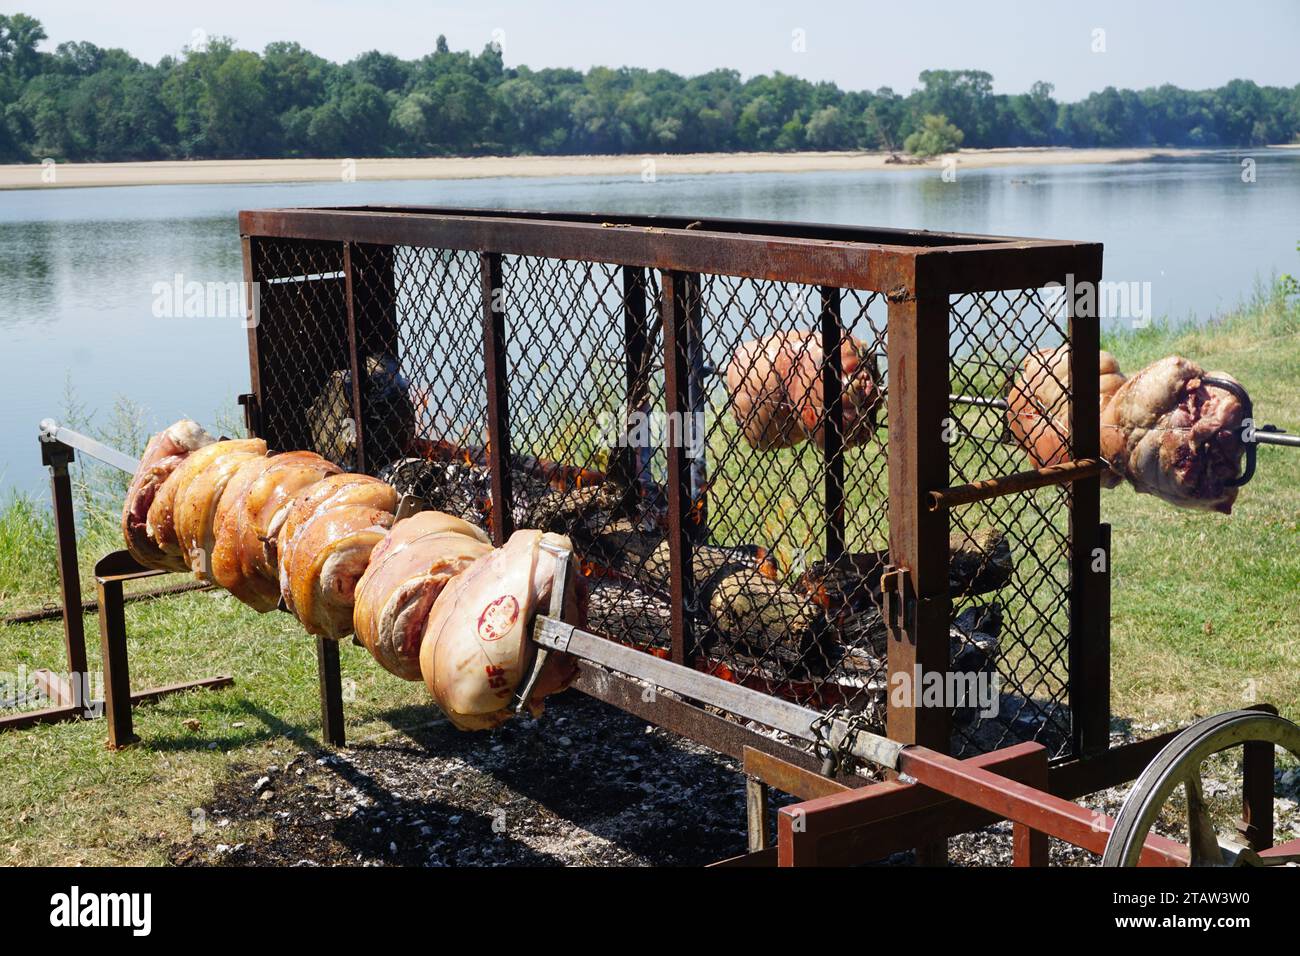 closeup of yummy pork roasts on spits cooking at an outdoor bbq on display for sale by the loire river in france Stock Photo